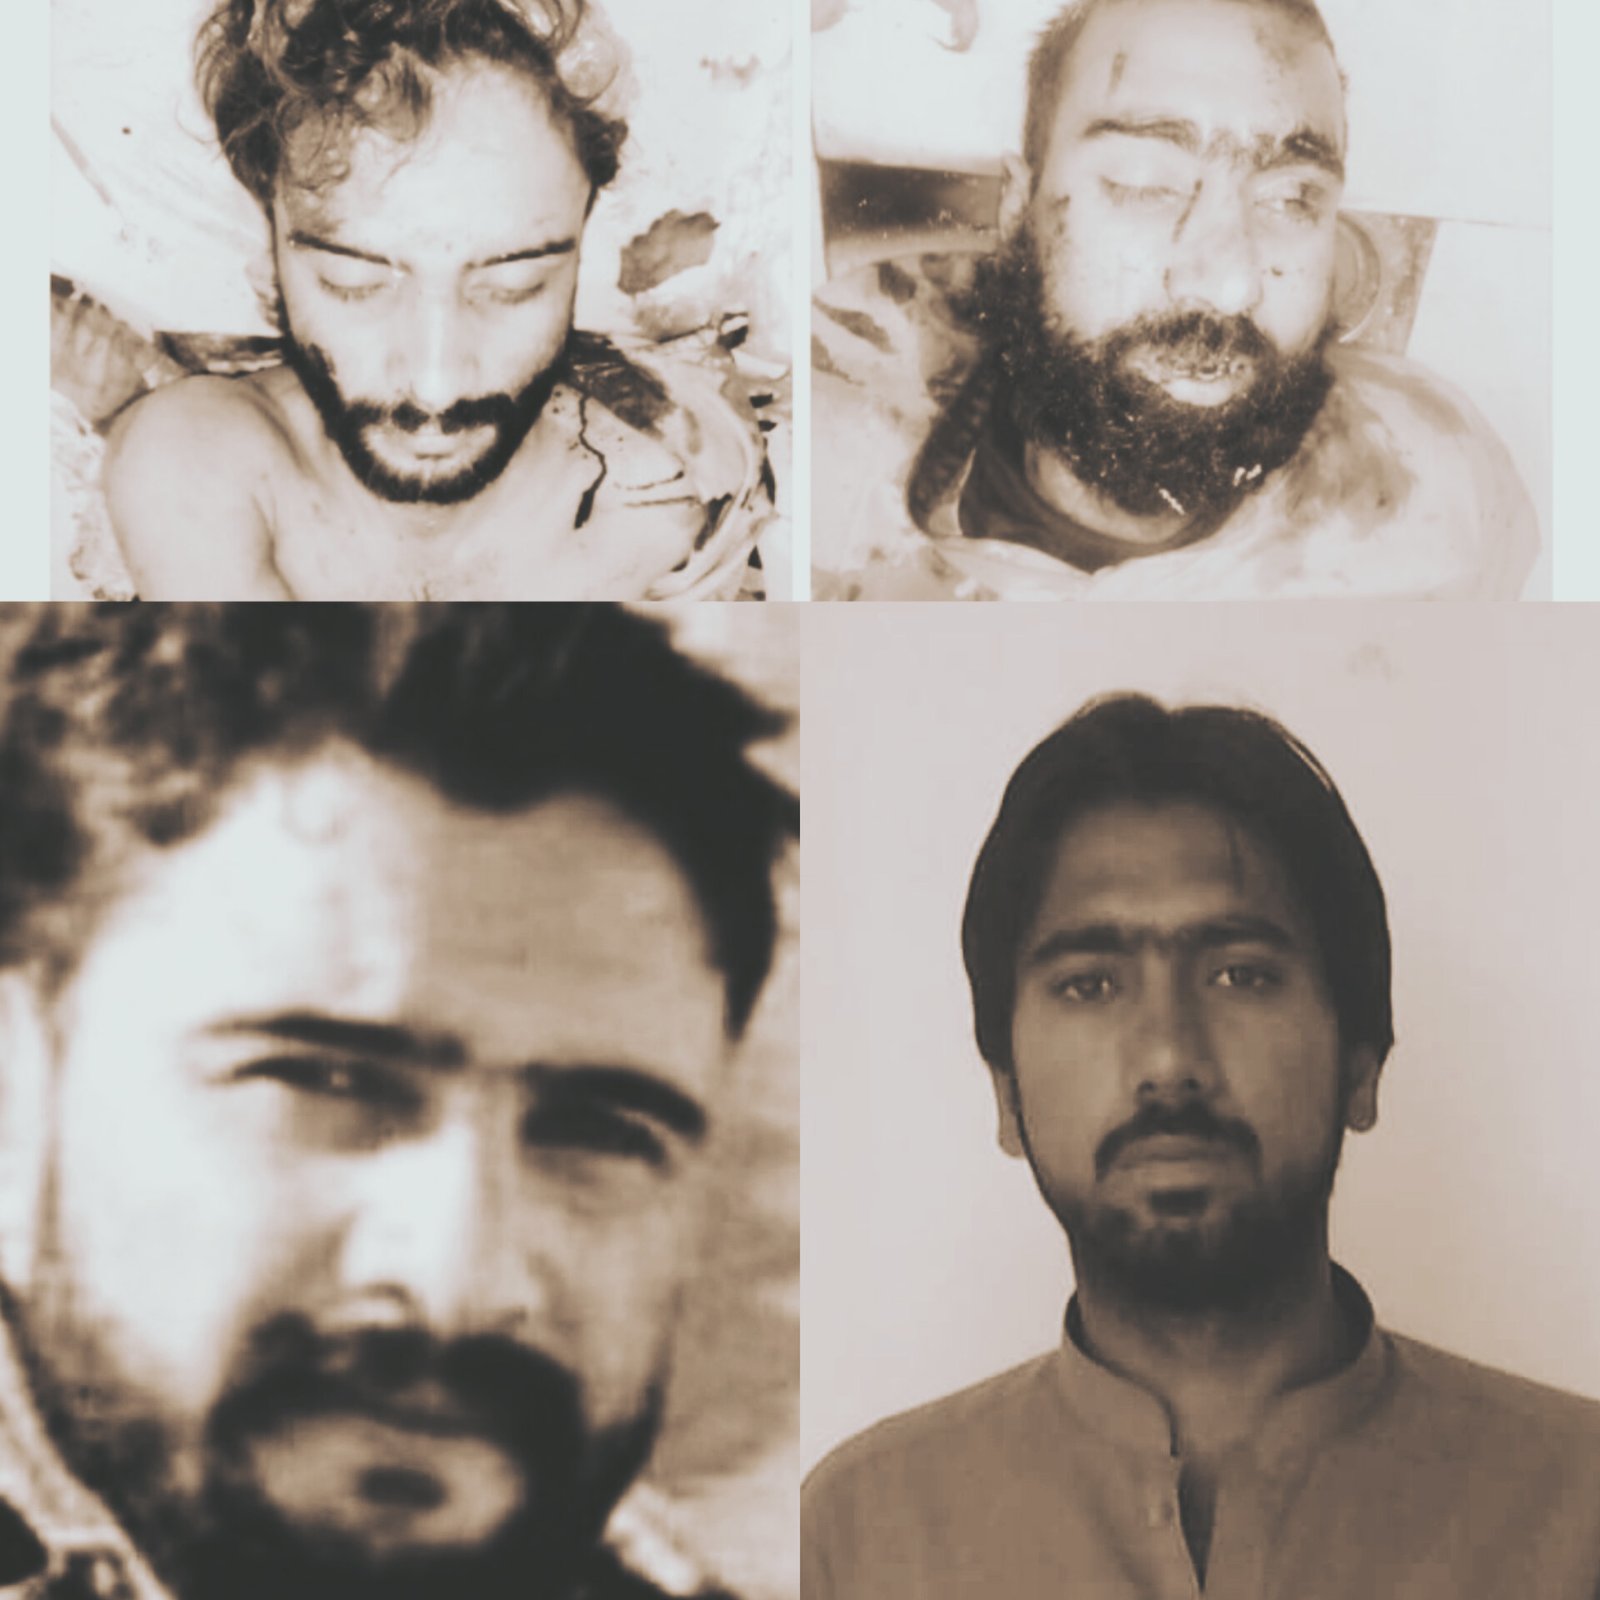 ’CTD’ kills two Forcibly disappeared Baloch youth in a fake encounter"